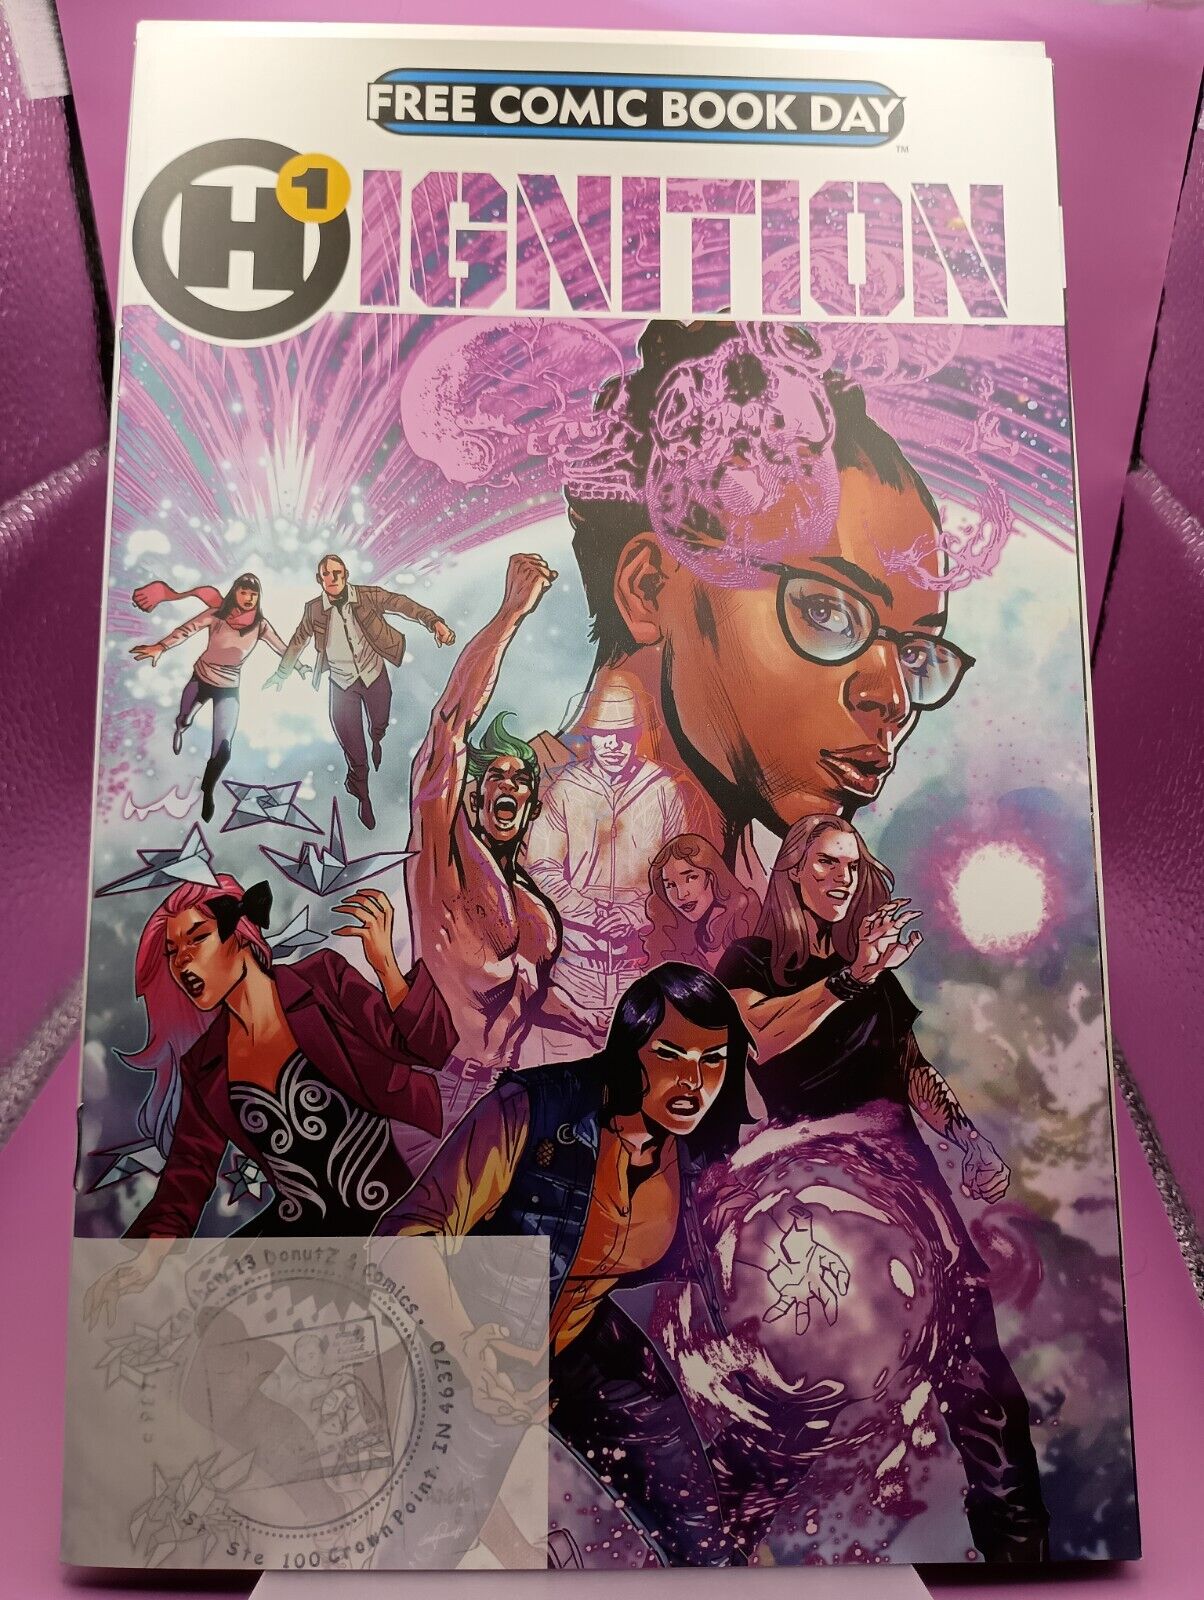 STAMPED 2019 FCBD H1 Ignition Promotional Giveaway Comic Book 